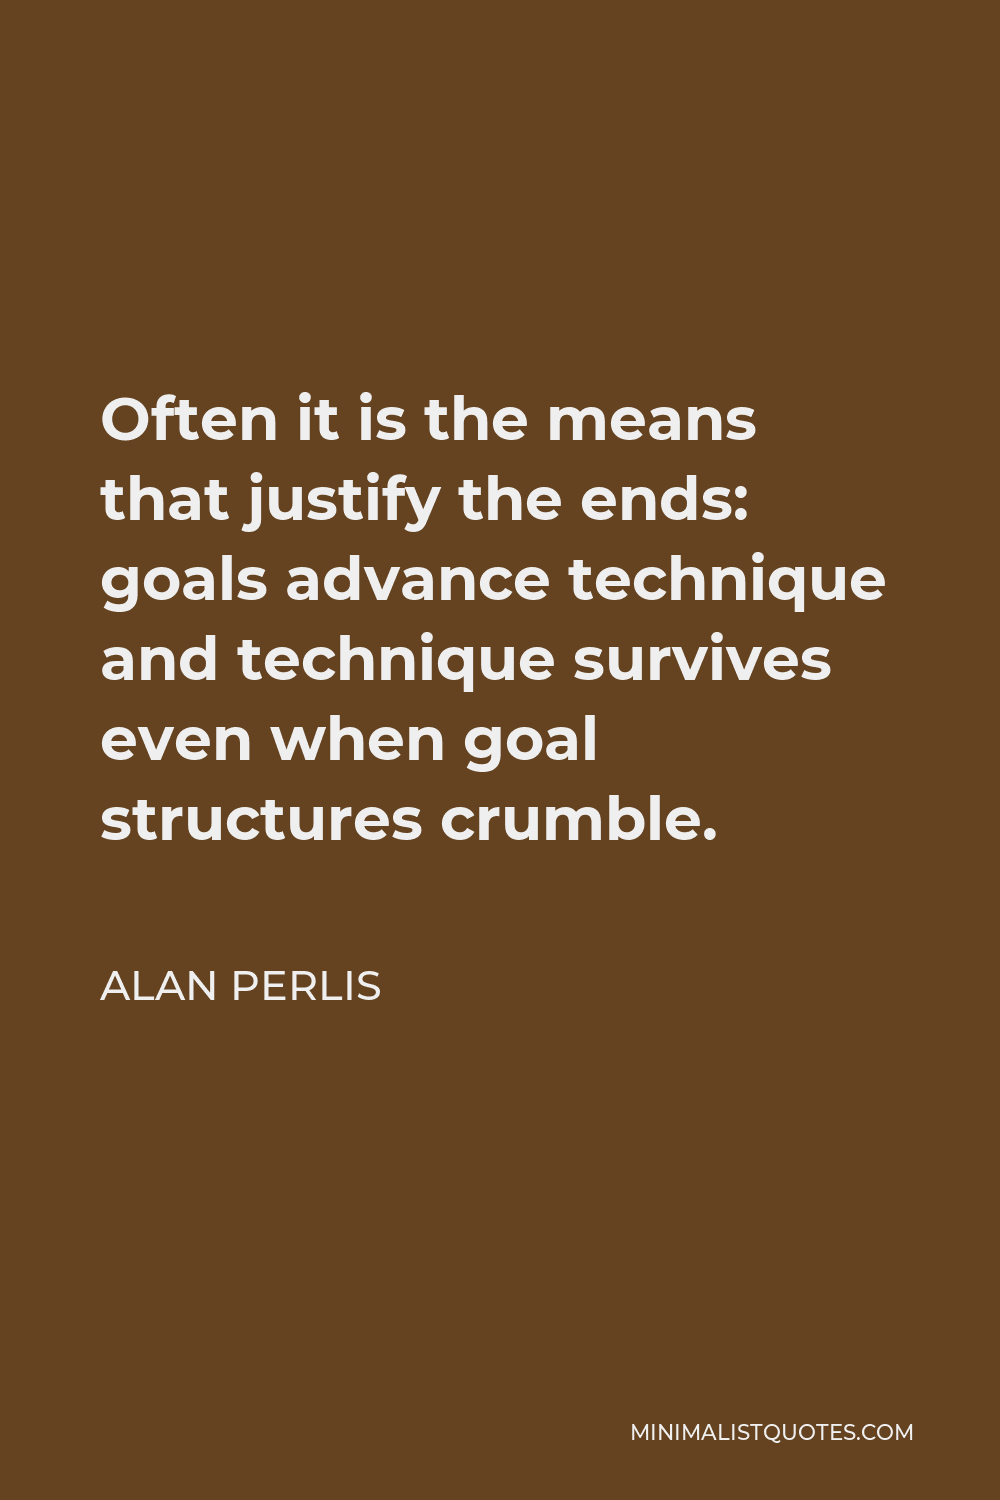 Alan Perlis Quote - Often it is the means that justify the ends: goals advance technique and technique survives even when goal structures crumble.